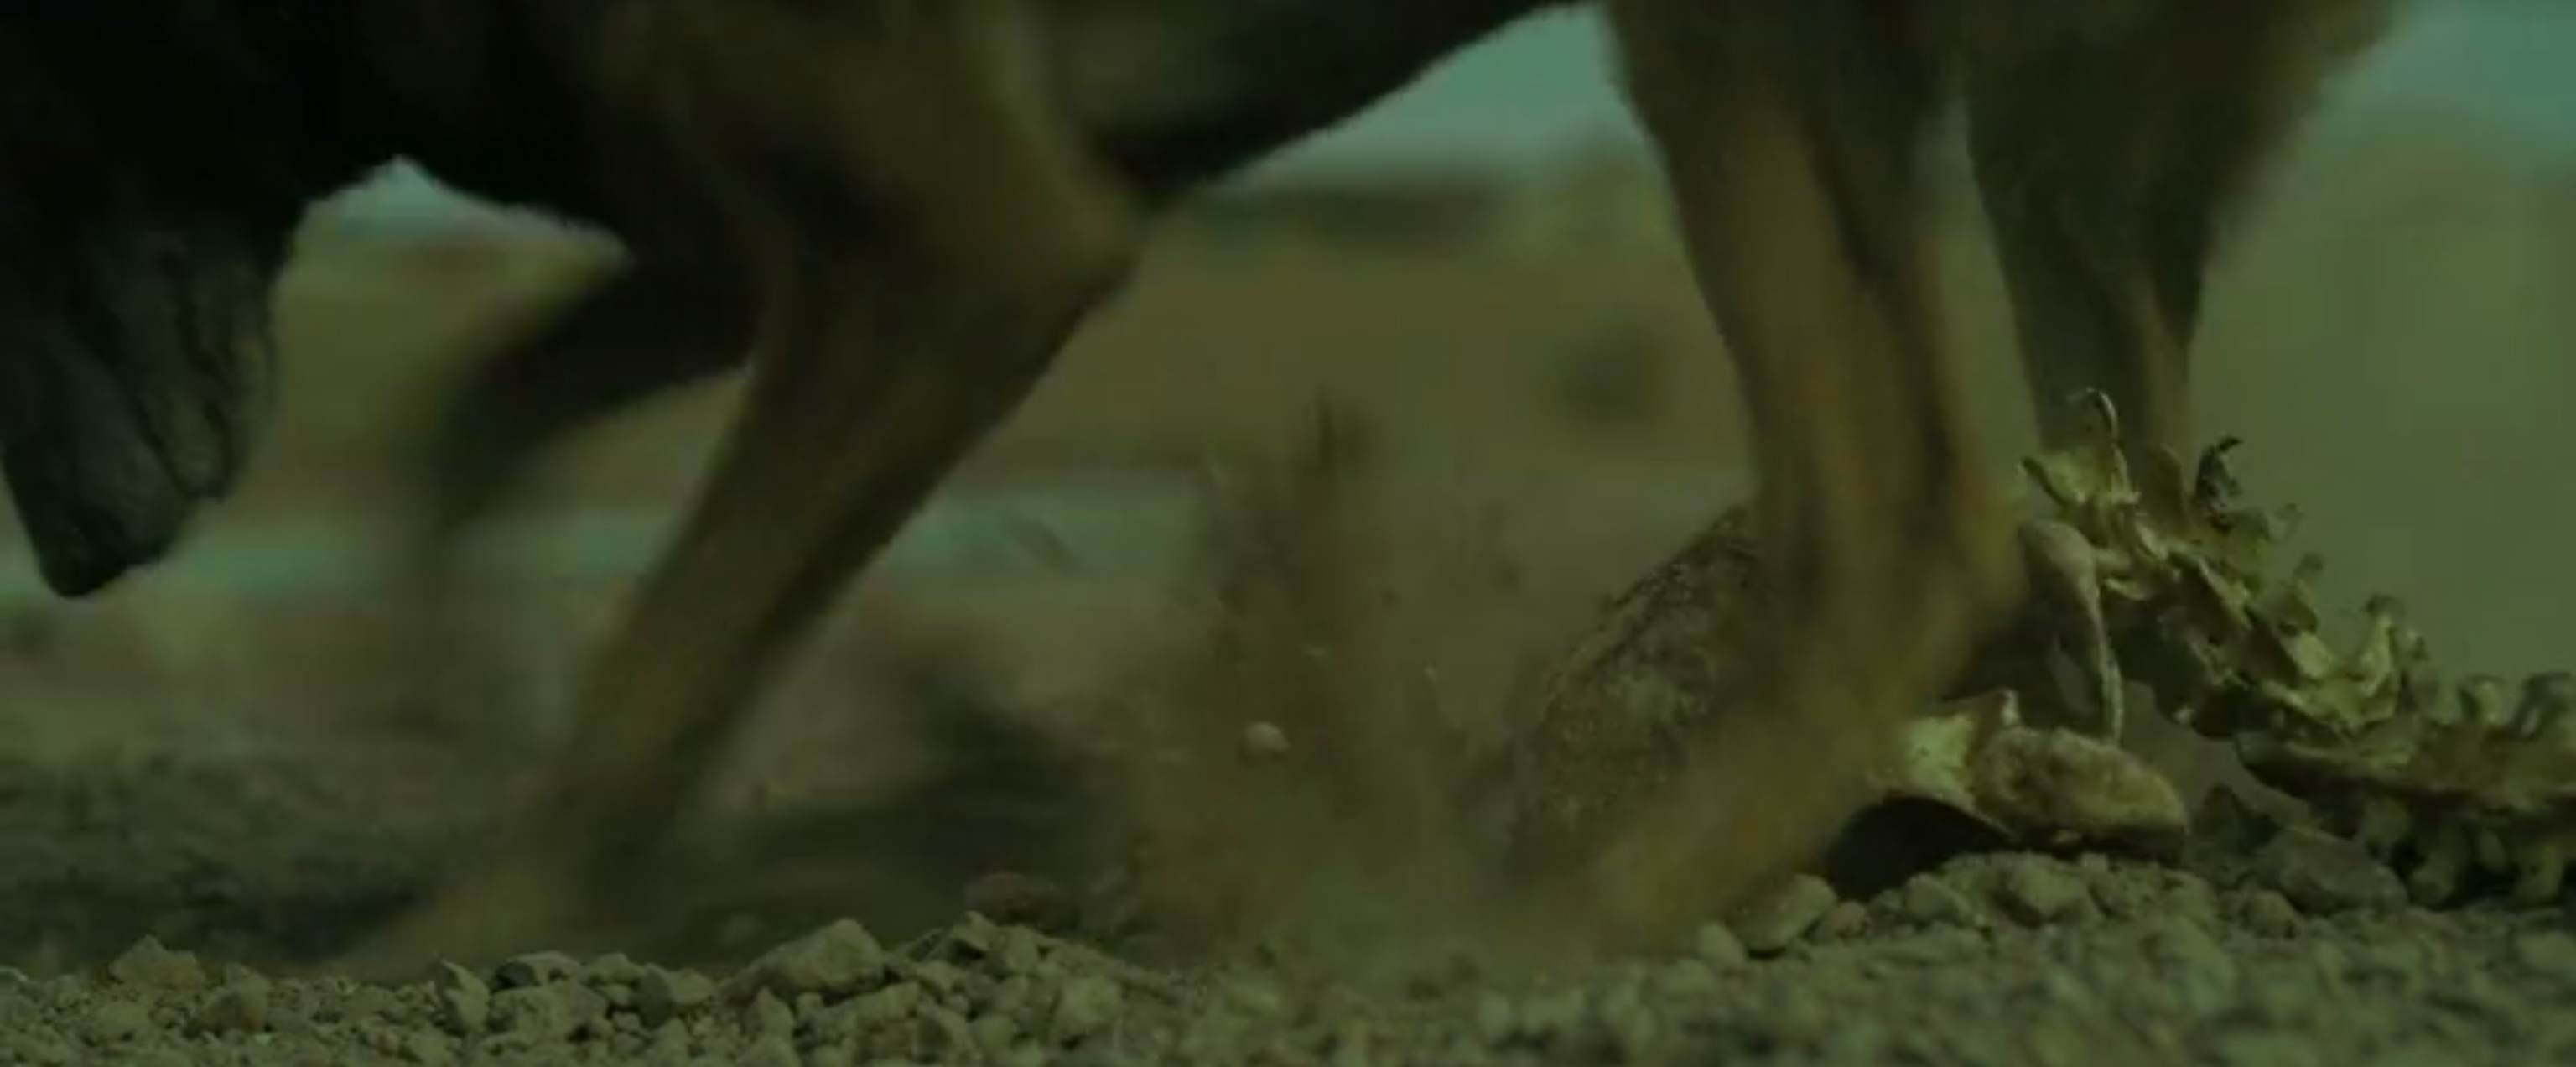  Dog digs up the human remains